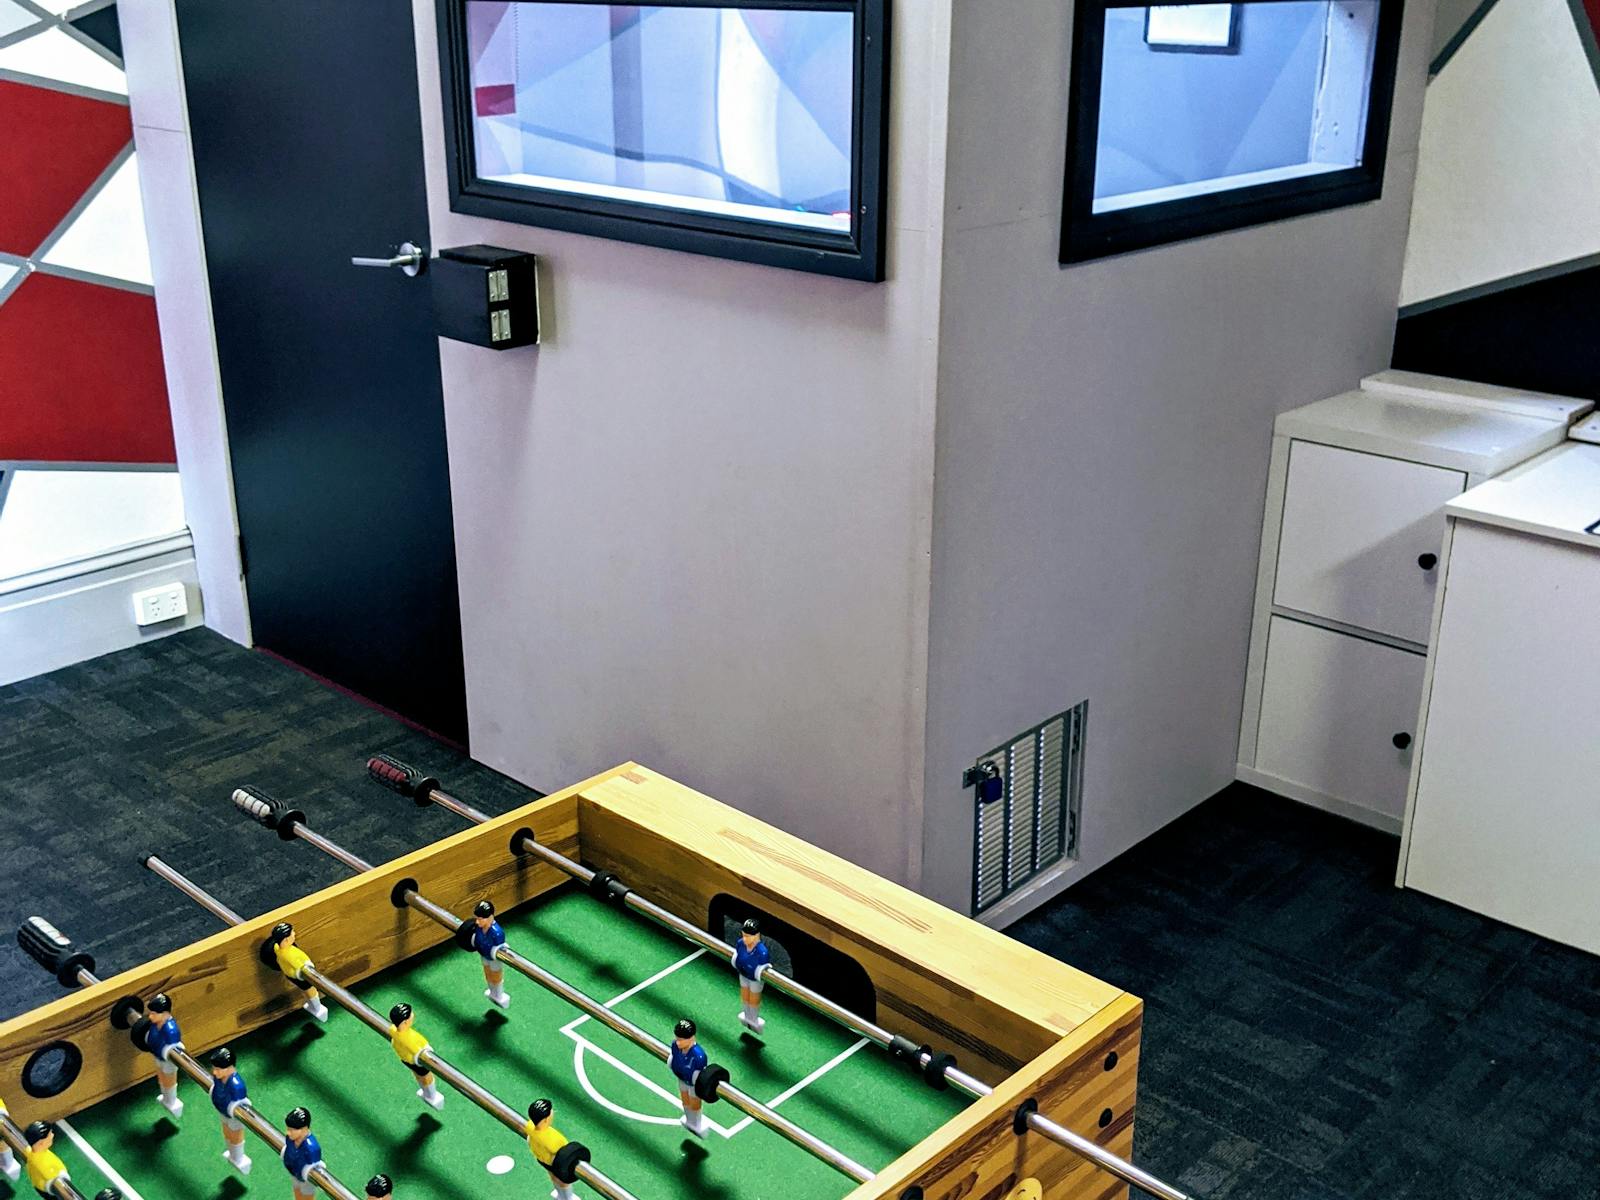 Side view of a foosball table with a desk and small grey room in the background, with two windows